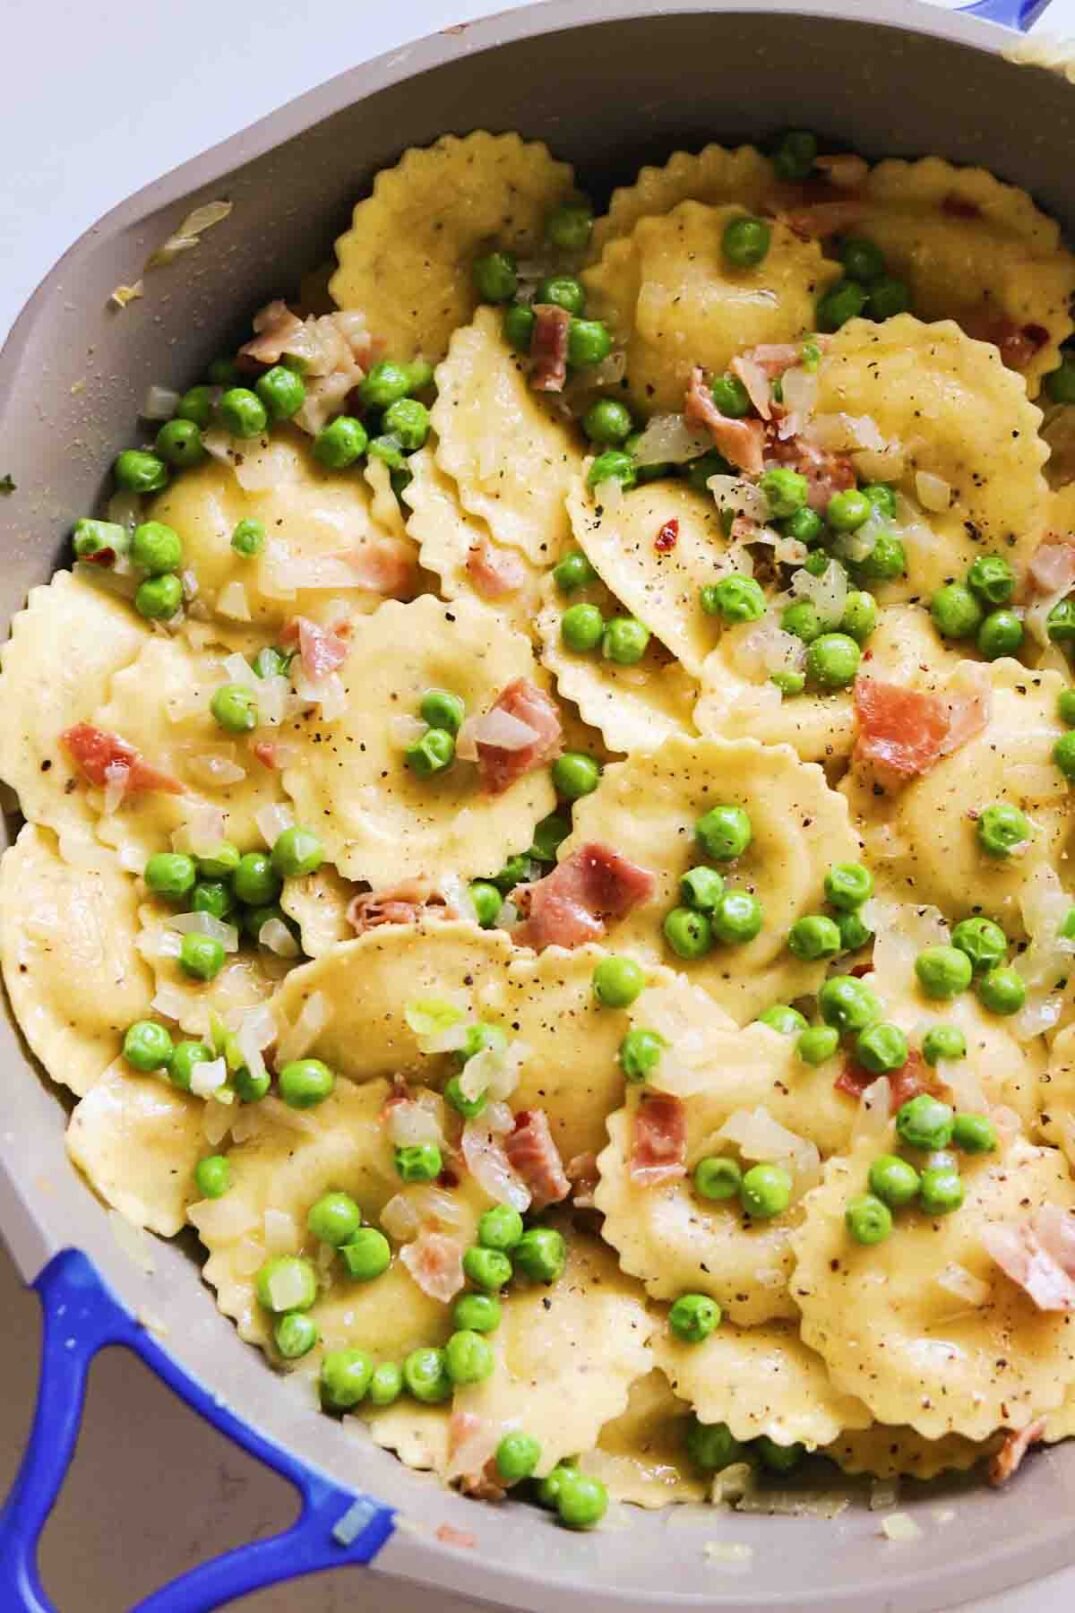 Trader Joe's Cacio e Pepe Ravioli cooked with peas and prosciutto topped with parmigiano and fresh cracked pepper.